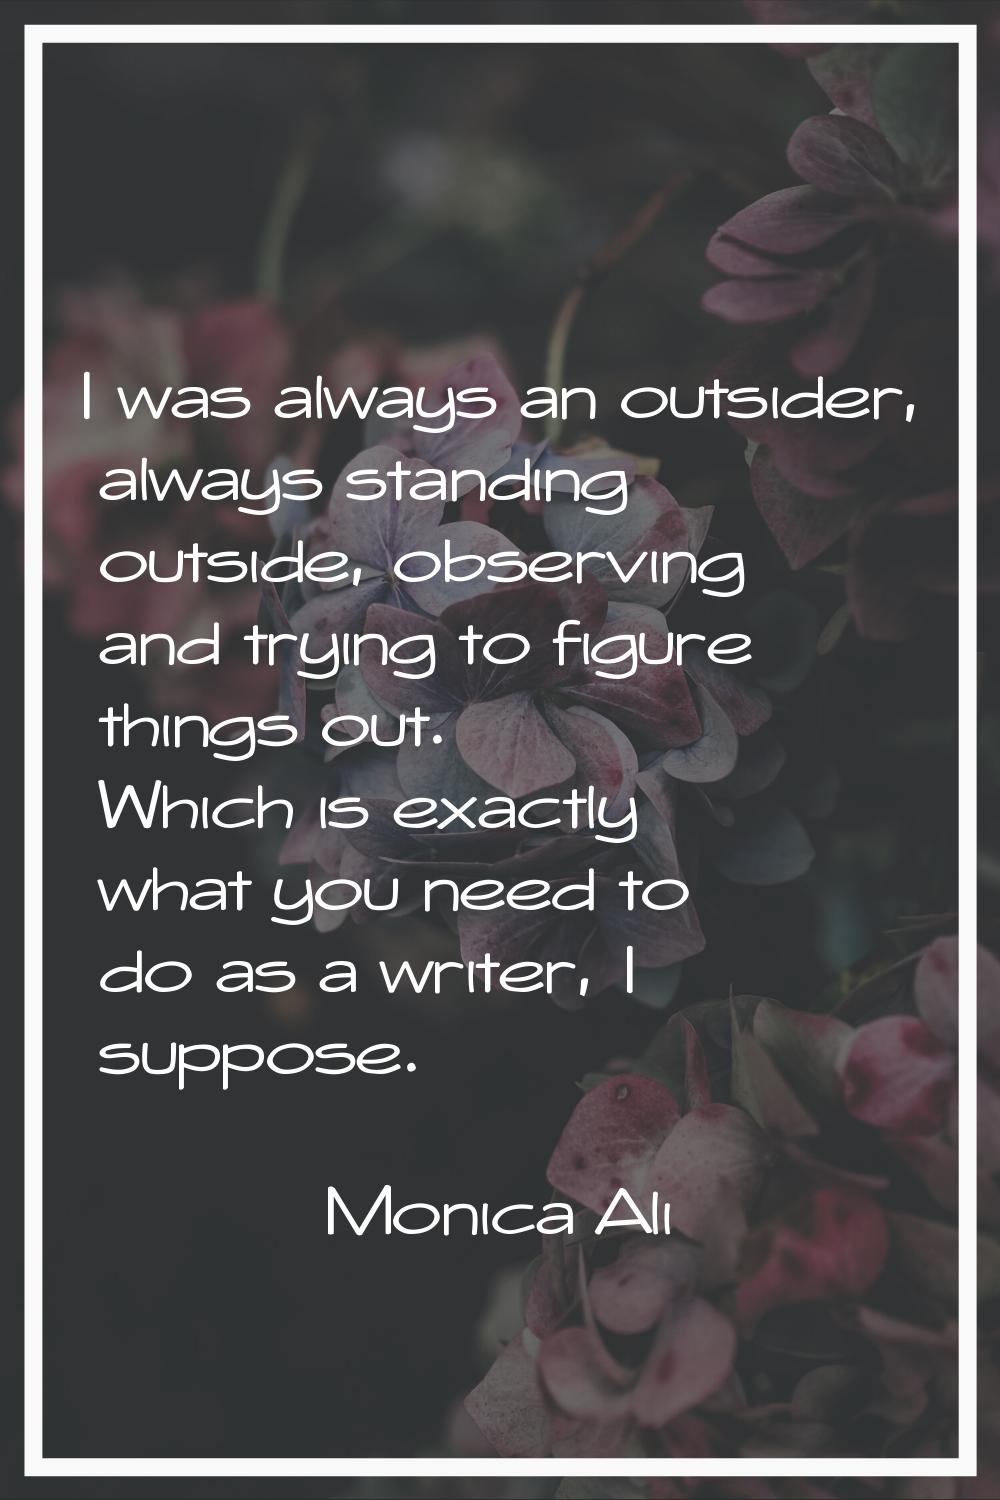 I was always an outsider, always standing outside, observing and trying to figure things out. Which